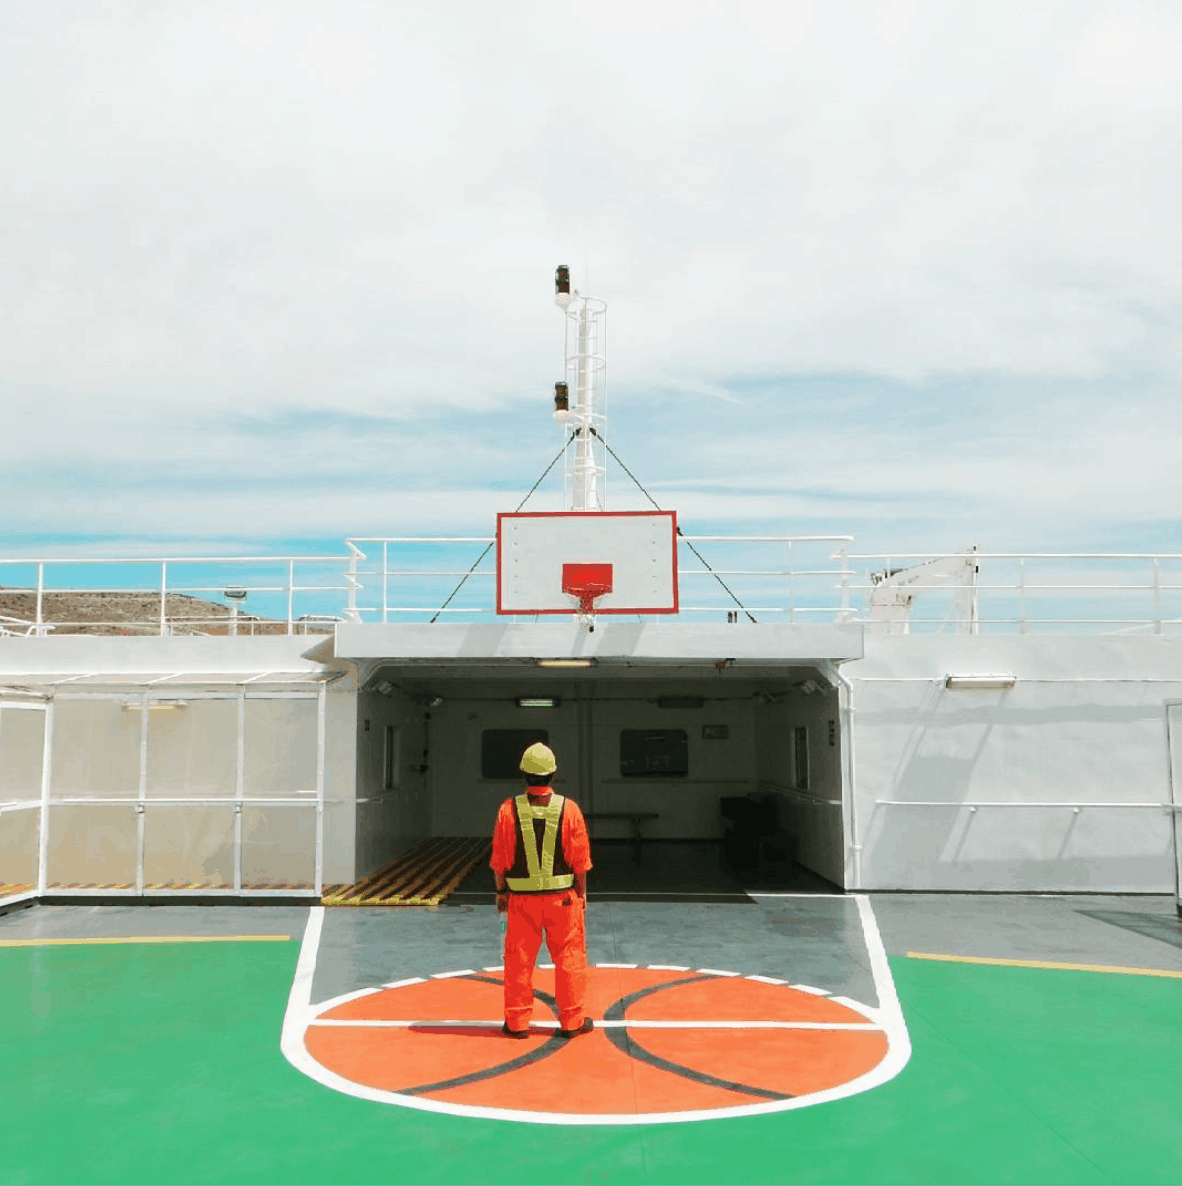 1. Basketball onboard. Credits to dimg73